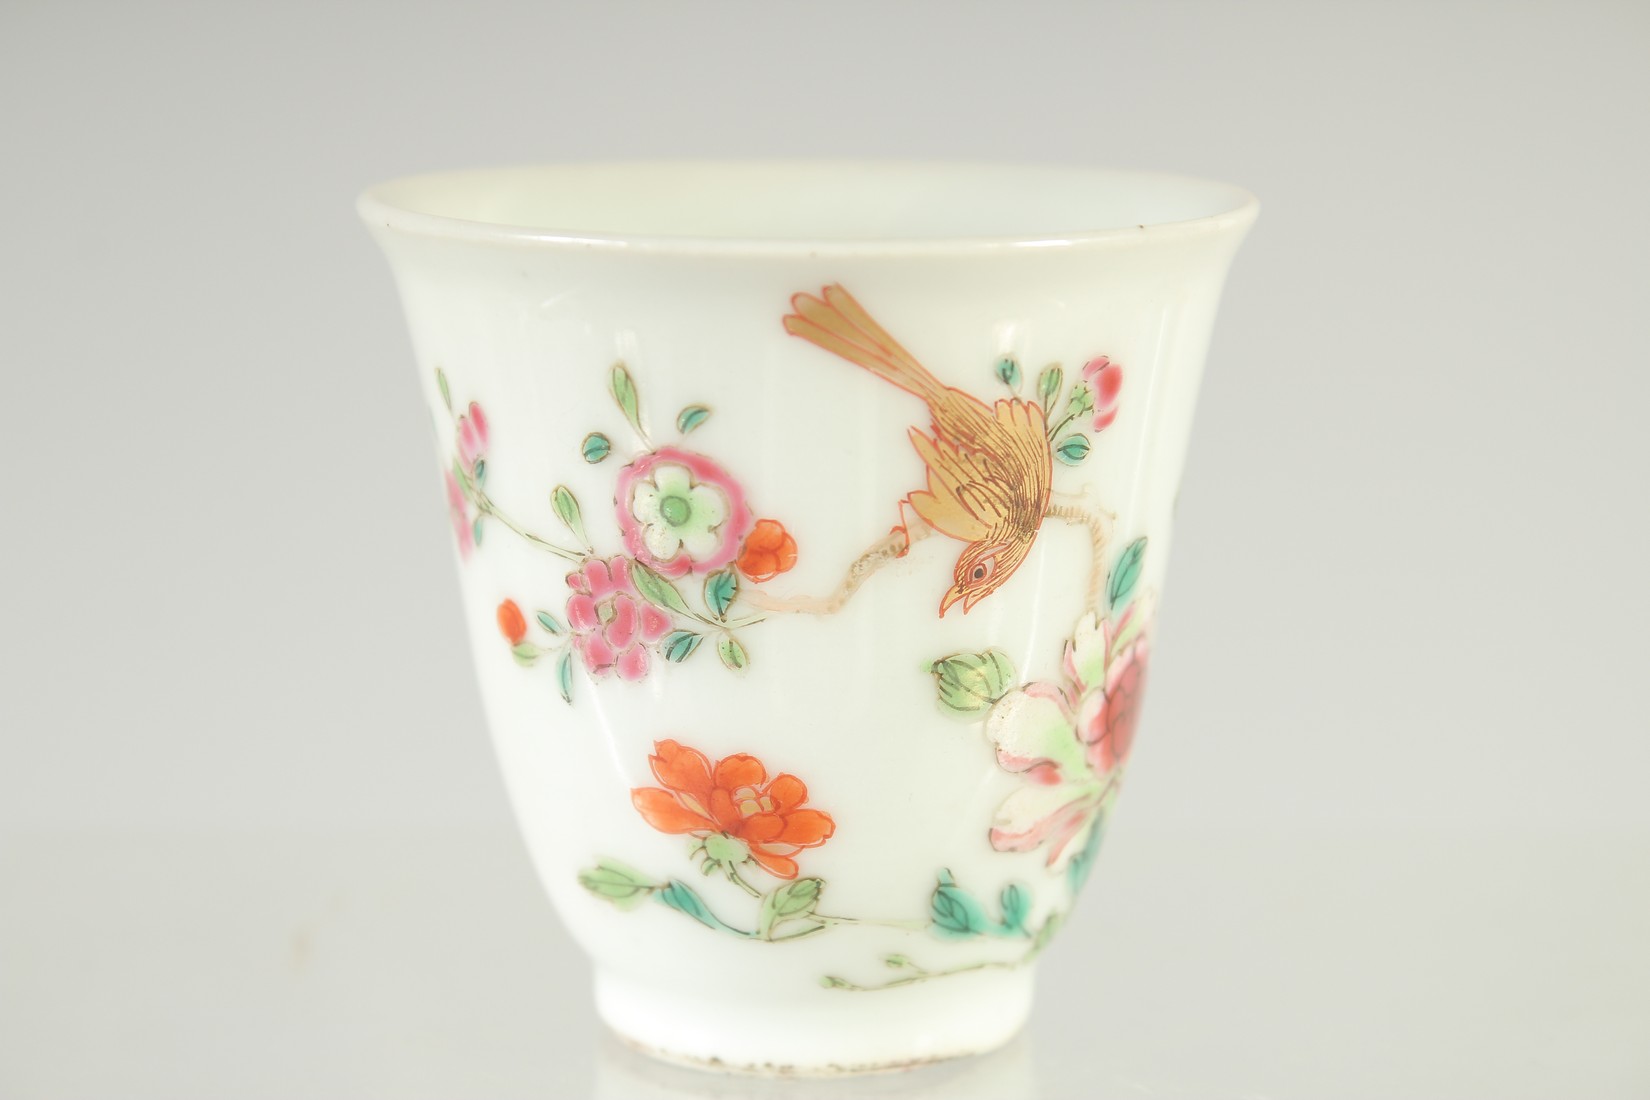 A 19TH CENTURY CHINESE FAMILLE ROSE PORCELAIN TEACUP, painted with a bird and flora, 6cm high. - Image 2 of 6